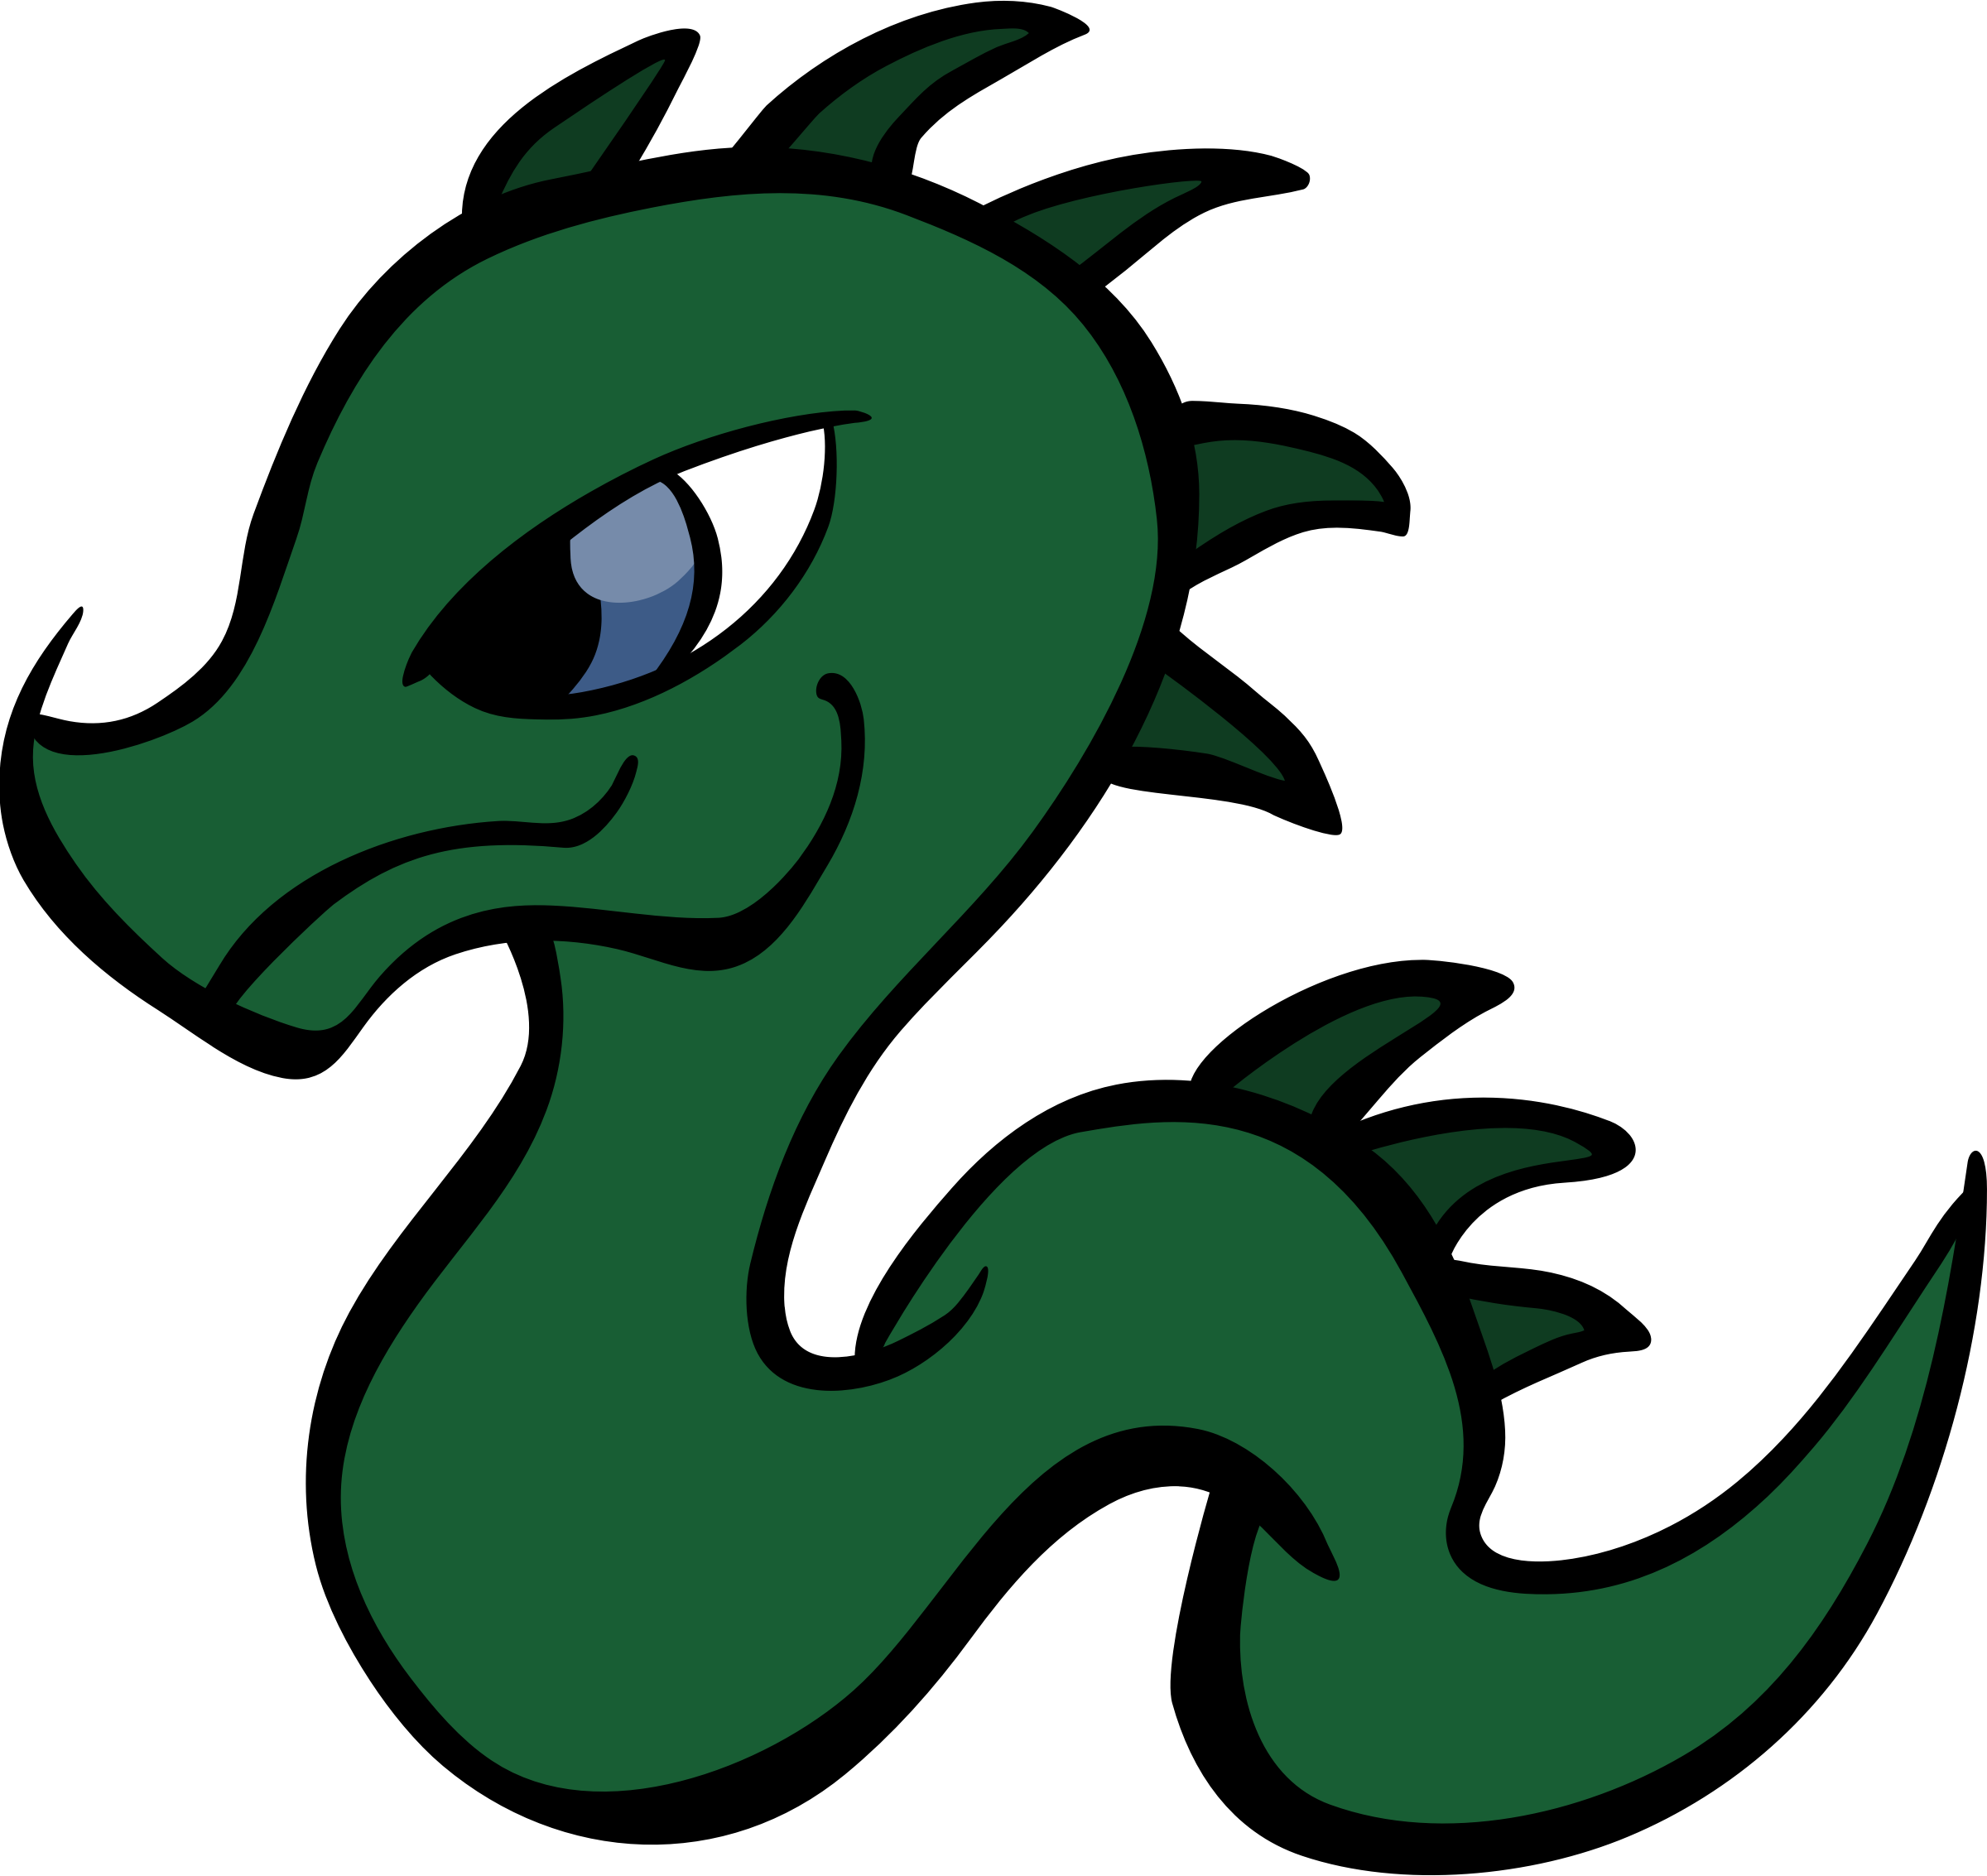 Baby Dragon Vector Cc0 Download Png Clipart